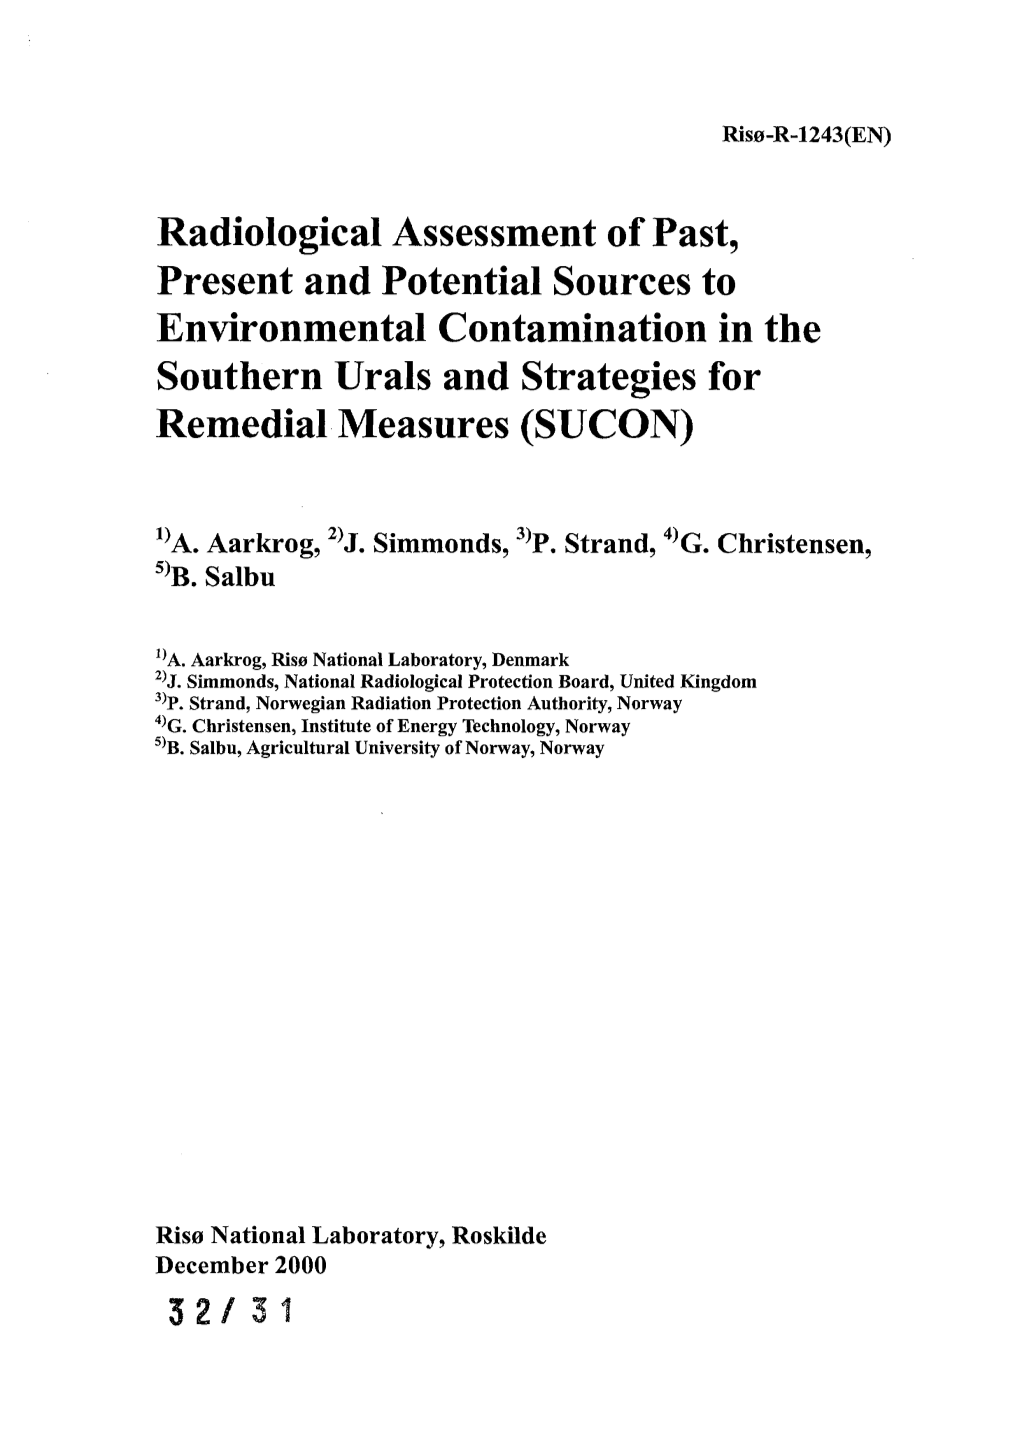 Radiological Assessment of Past, Present and Potential Sources to Environmental Contamination in the Southern Urals and Strategies for Remedial Measures (SUCON)